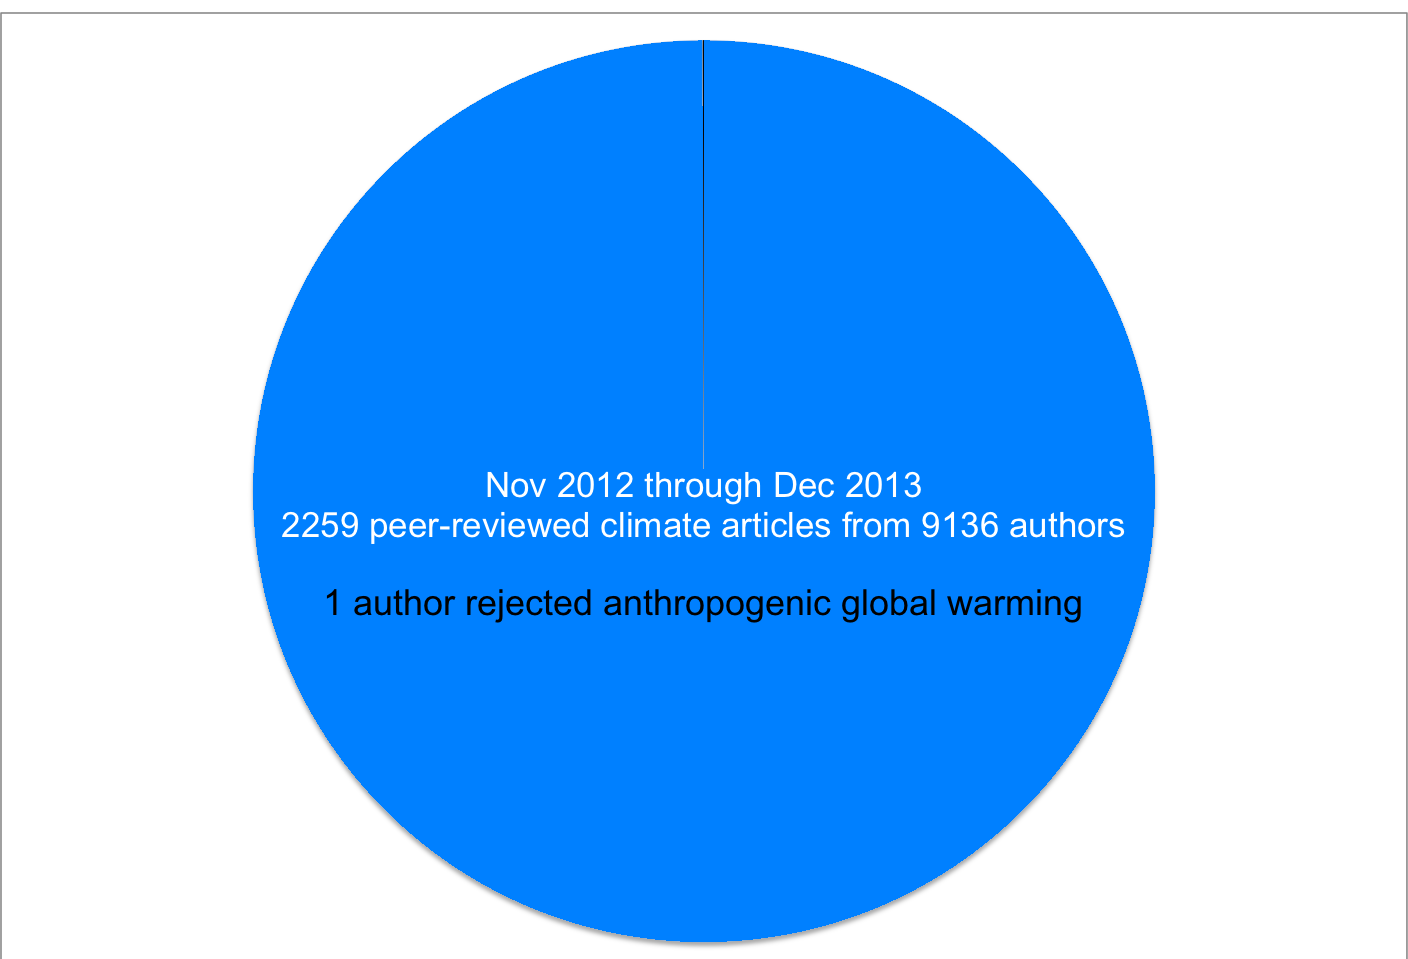 climate change science pie chart